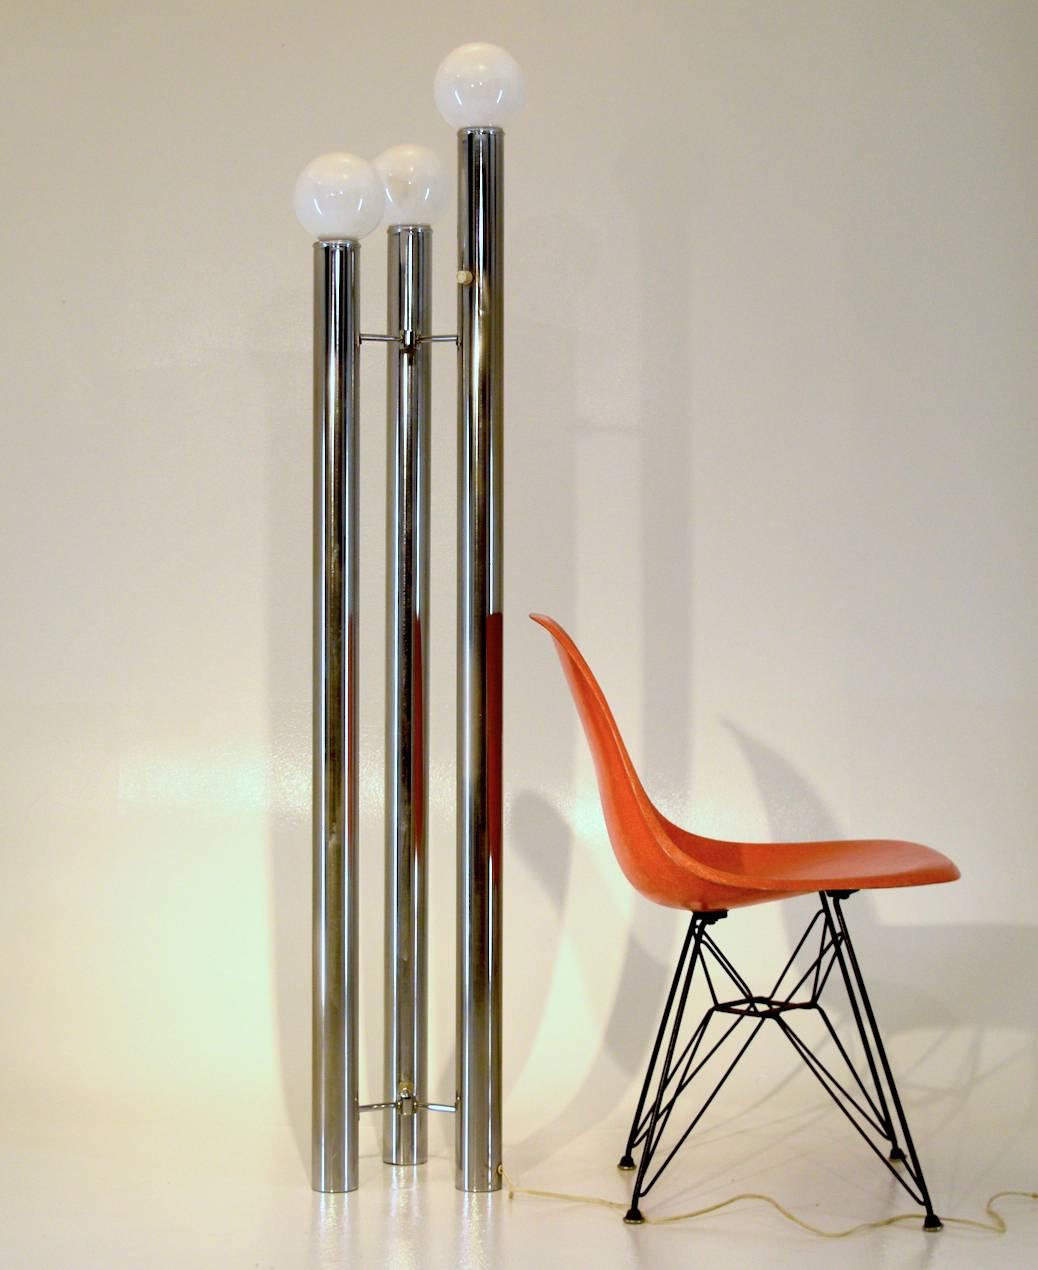 Tony Paul,
Mutual-sunset lamp manufacturing company
1972, Bellini Collection, USA
Polished steel
Measures: 60.5 tall x 11 inches wide circular measure

This skyscraper tripod floor lamp imparts an industrial lighting feel with it's raw polished